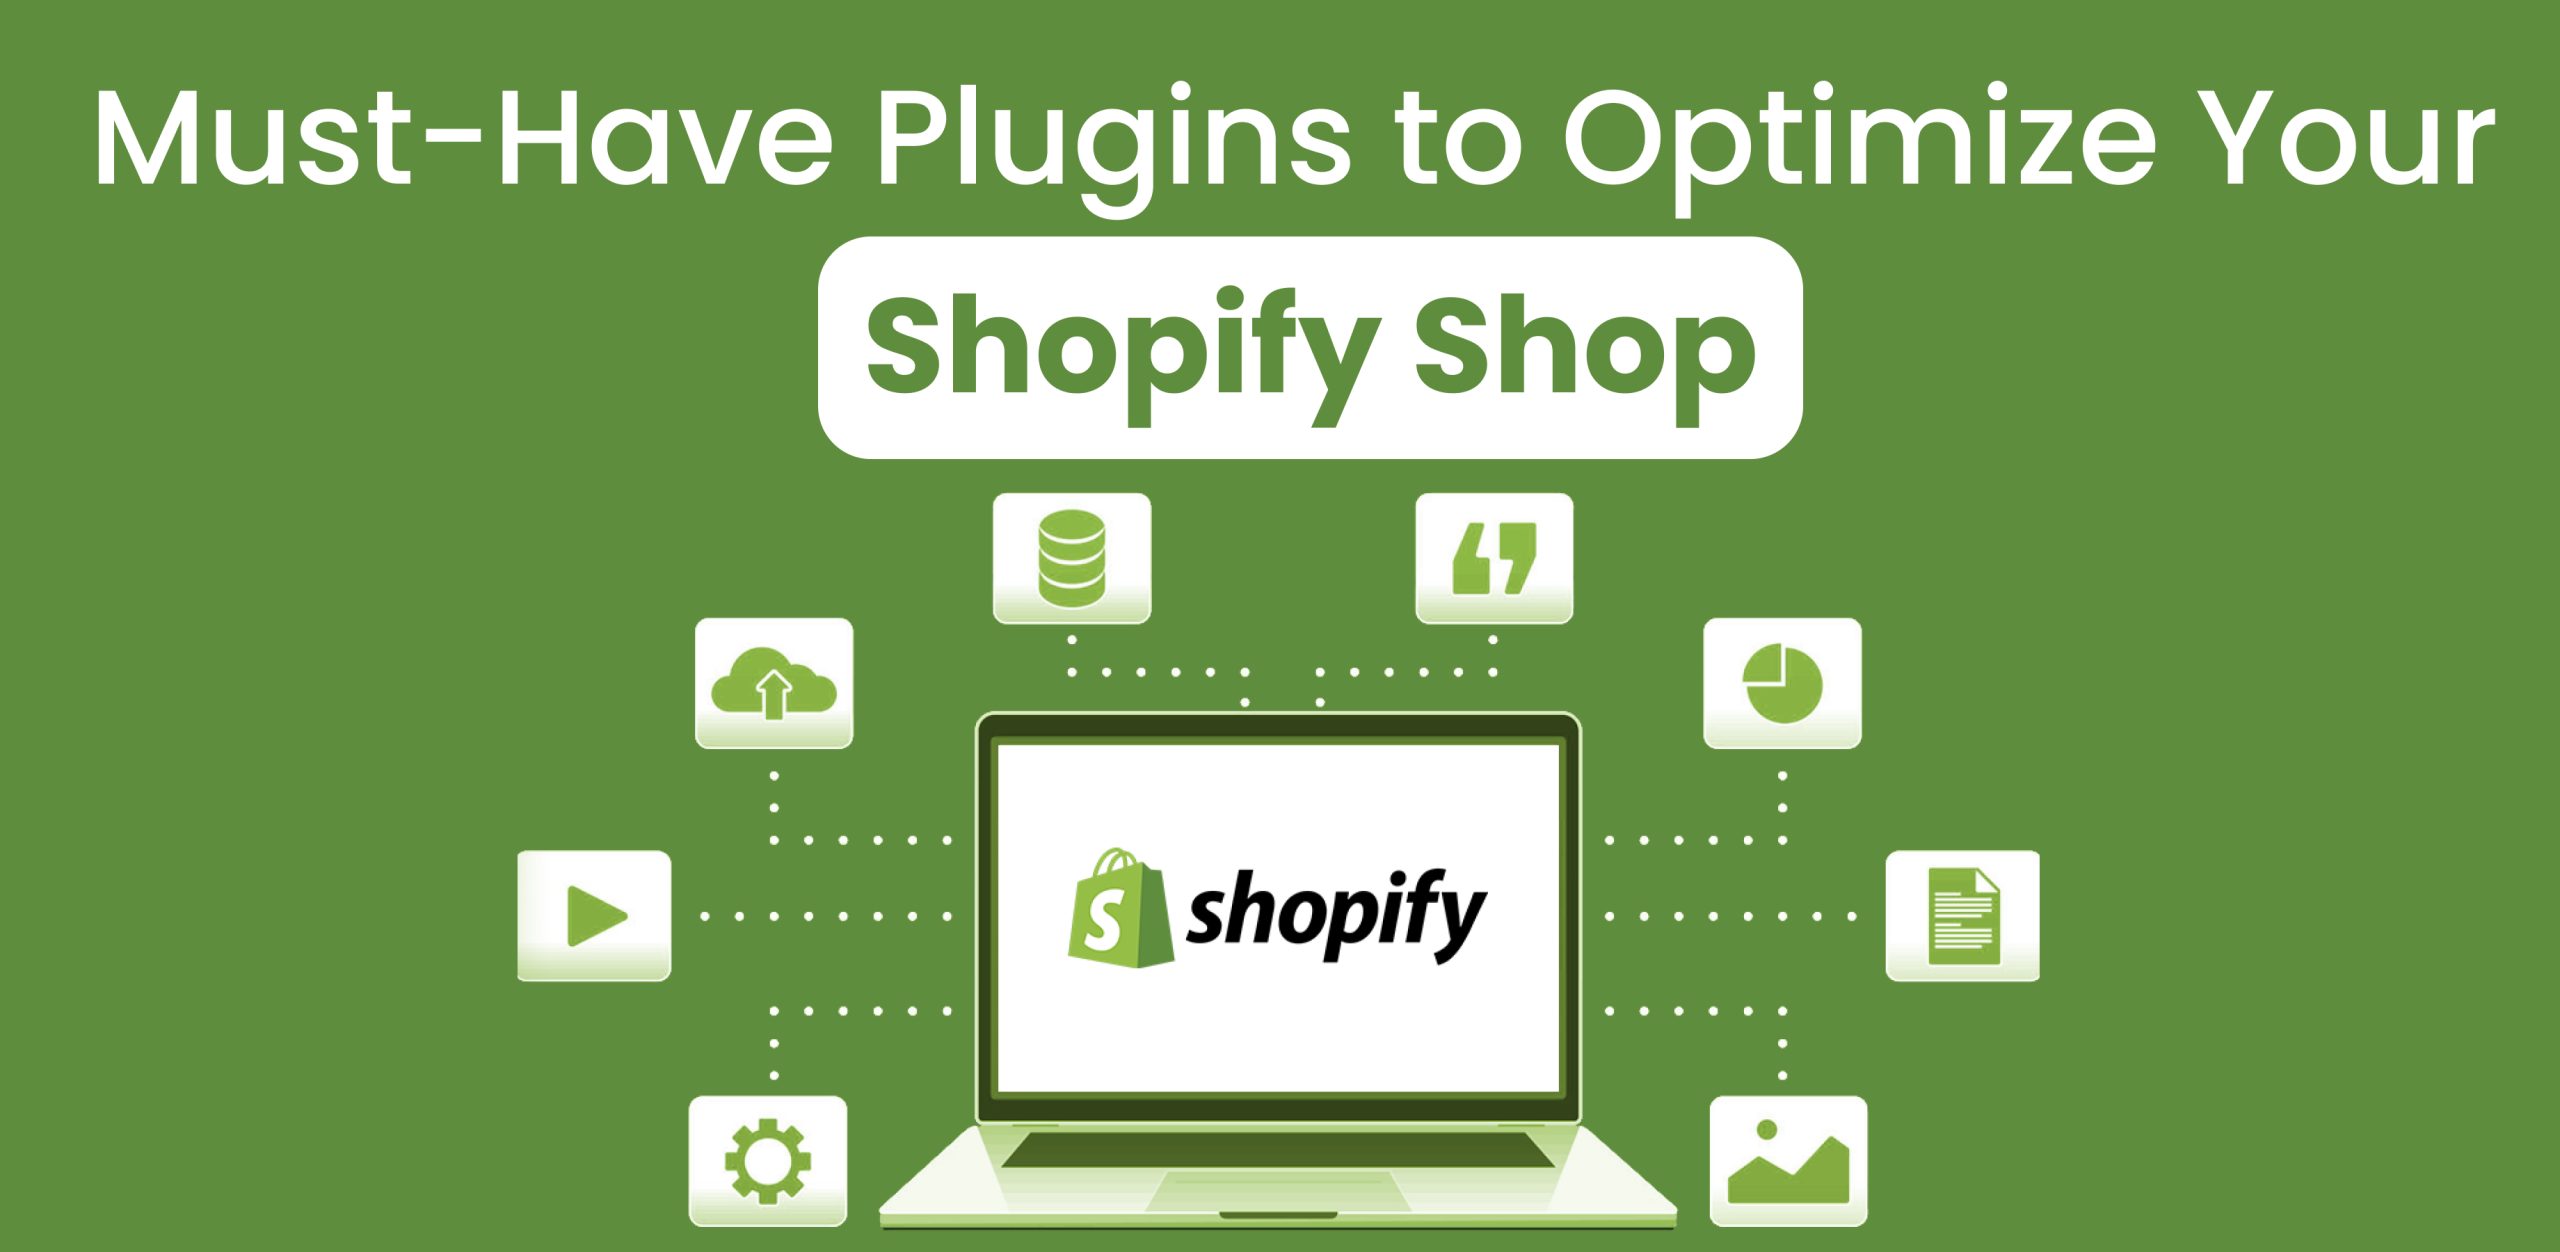 Must-Have Plugins to Optimize Your Shopify Shop